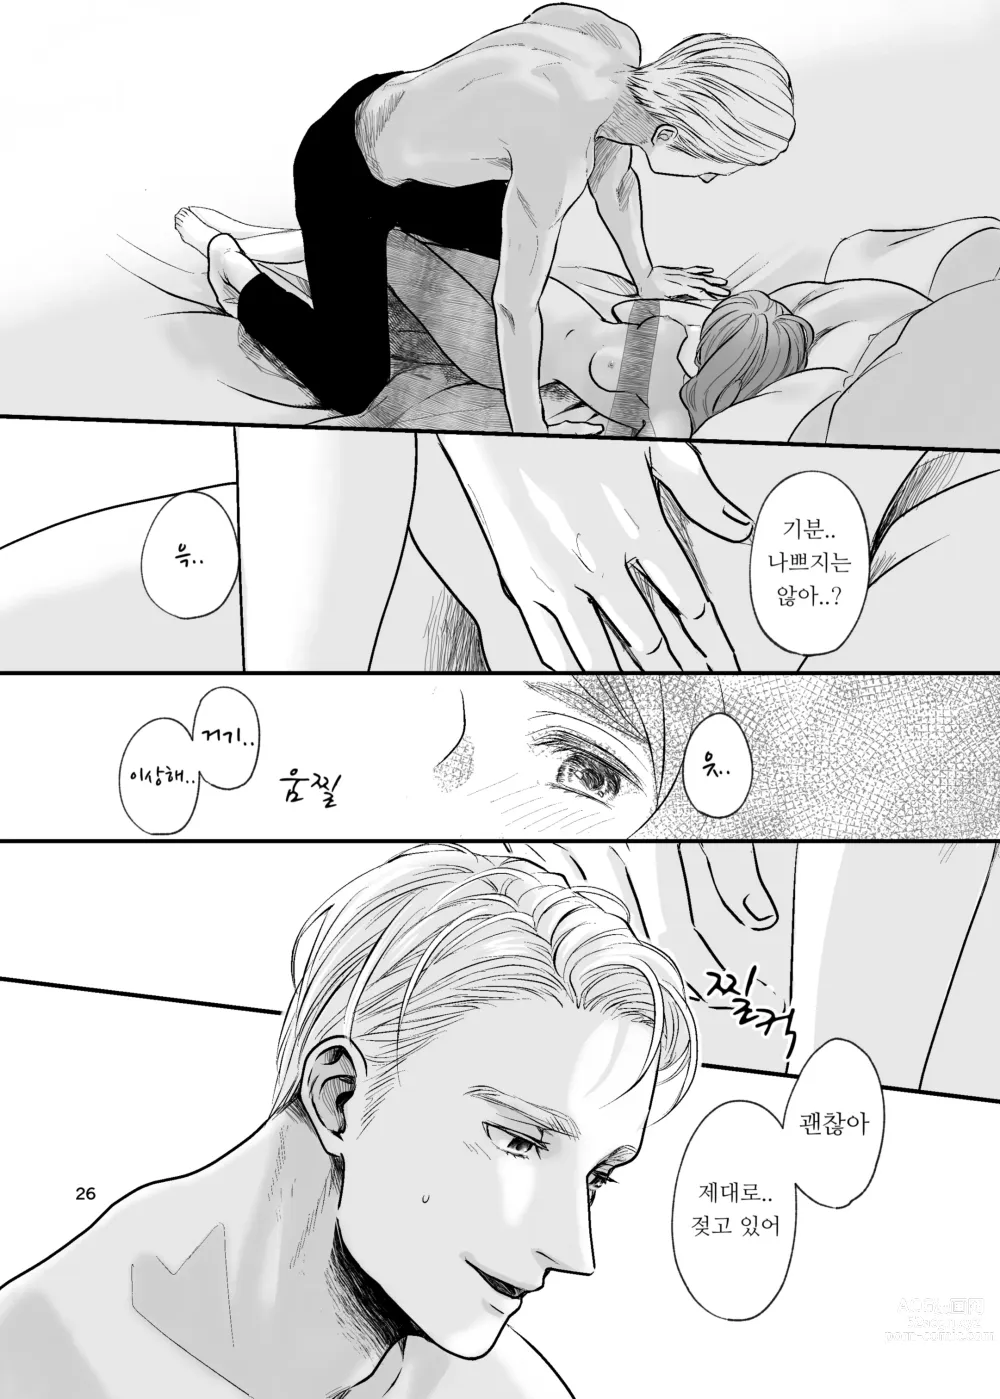 Page 26 of doujinshi 수인 영애와 혼약자